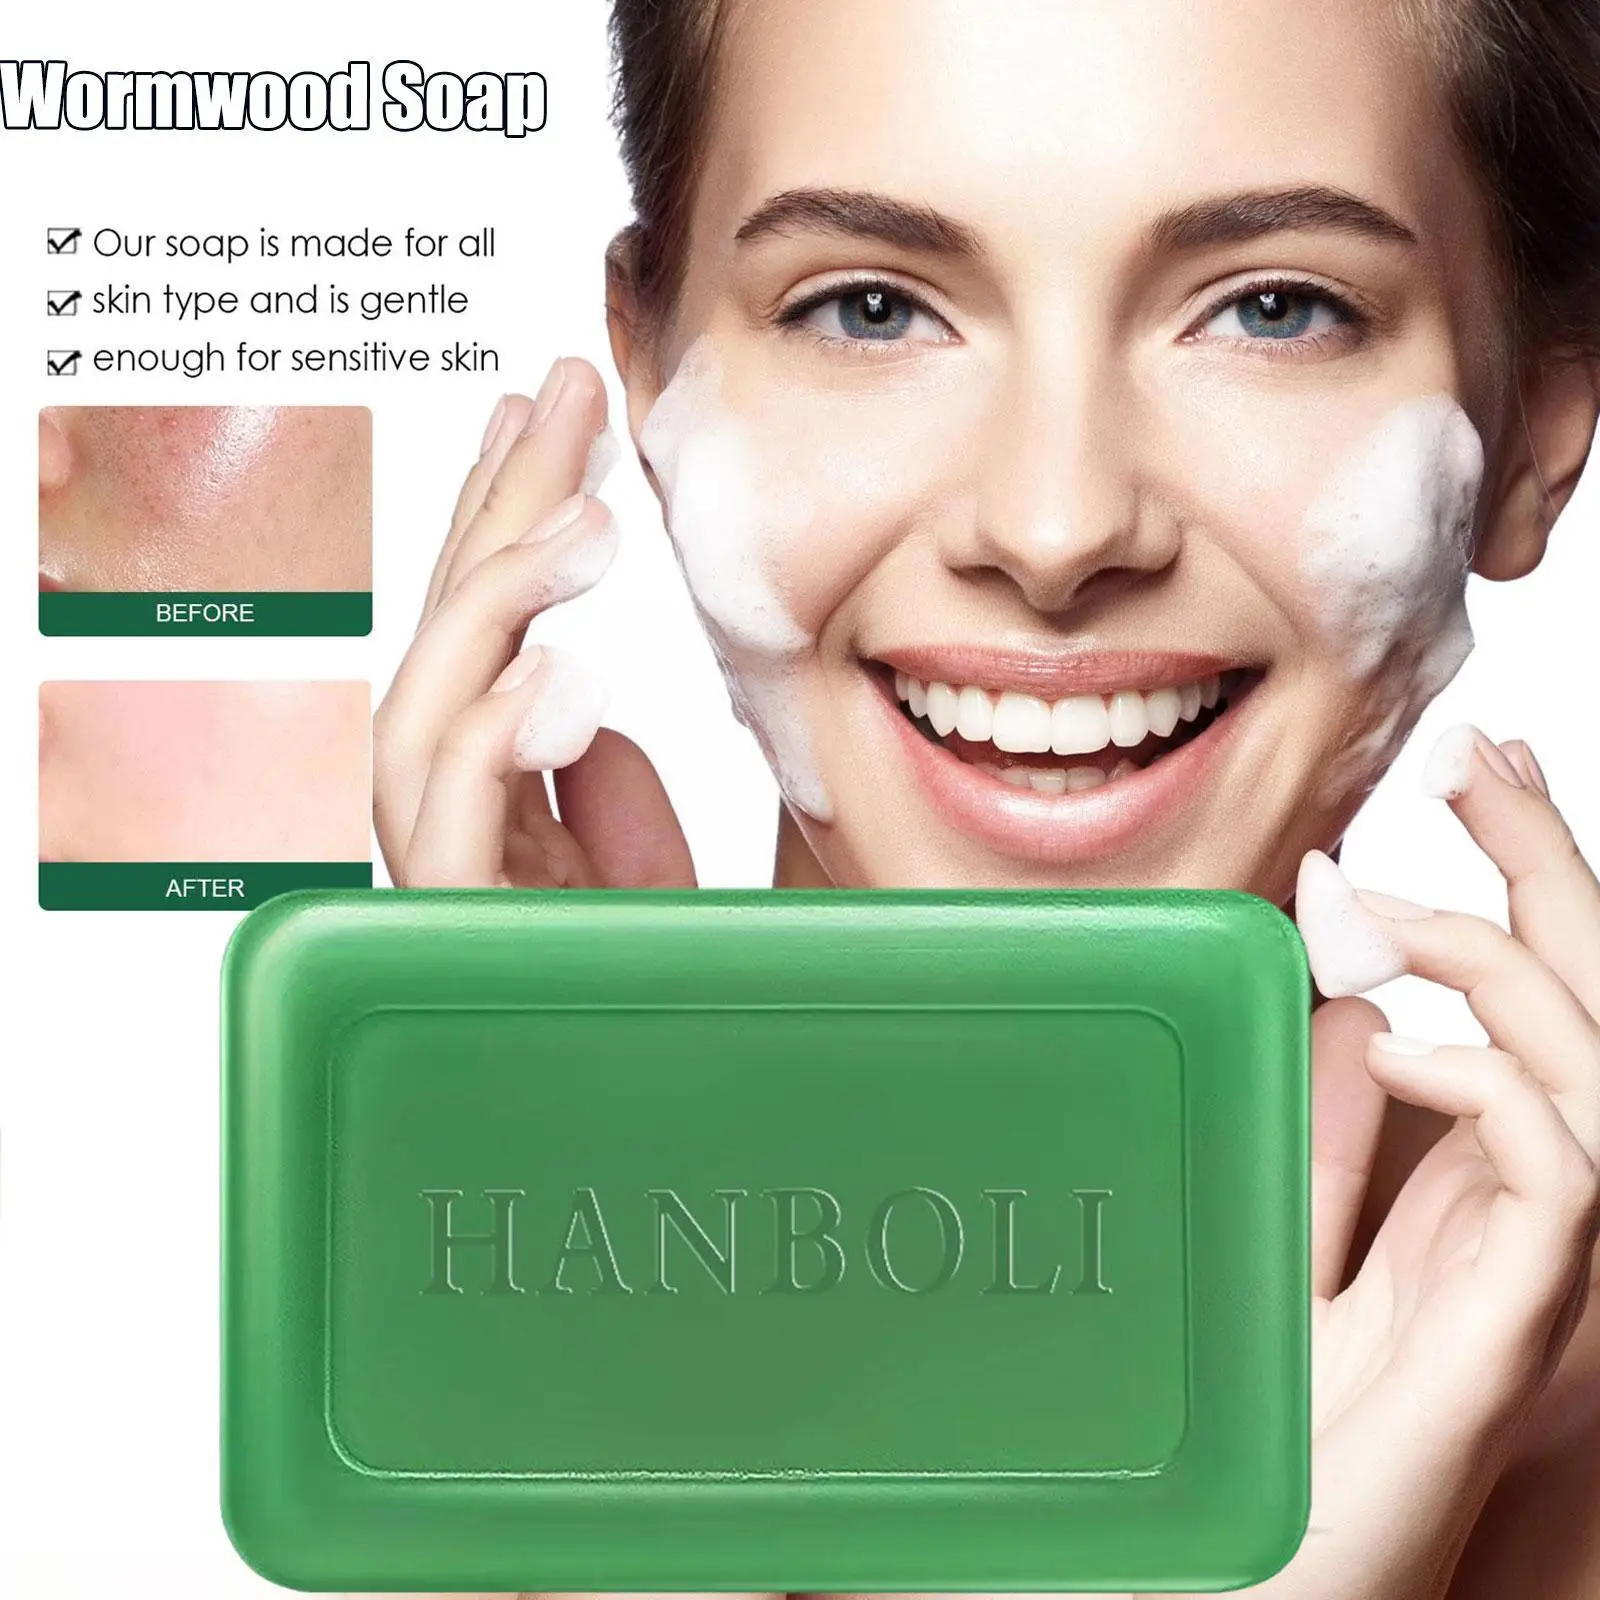 

Wormwood Soap Anti Fungus Itching Mite Blackhead Acne Oil Cleaning Skin Body Remove Face Soap Soap Bath Care Control 100g B D6V6